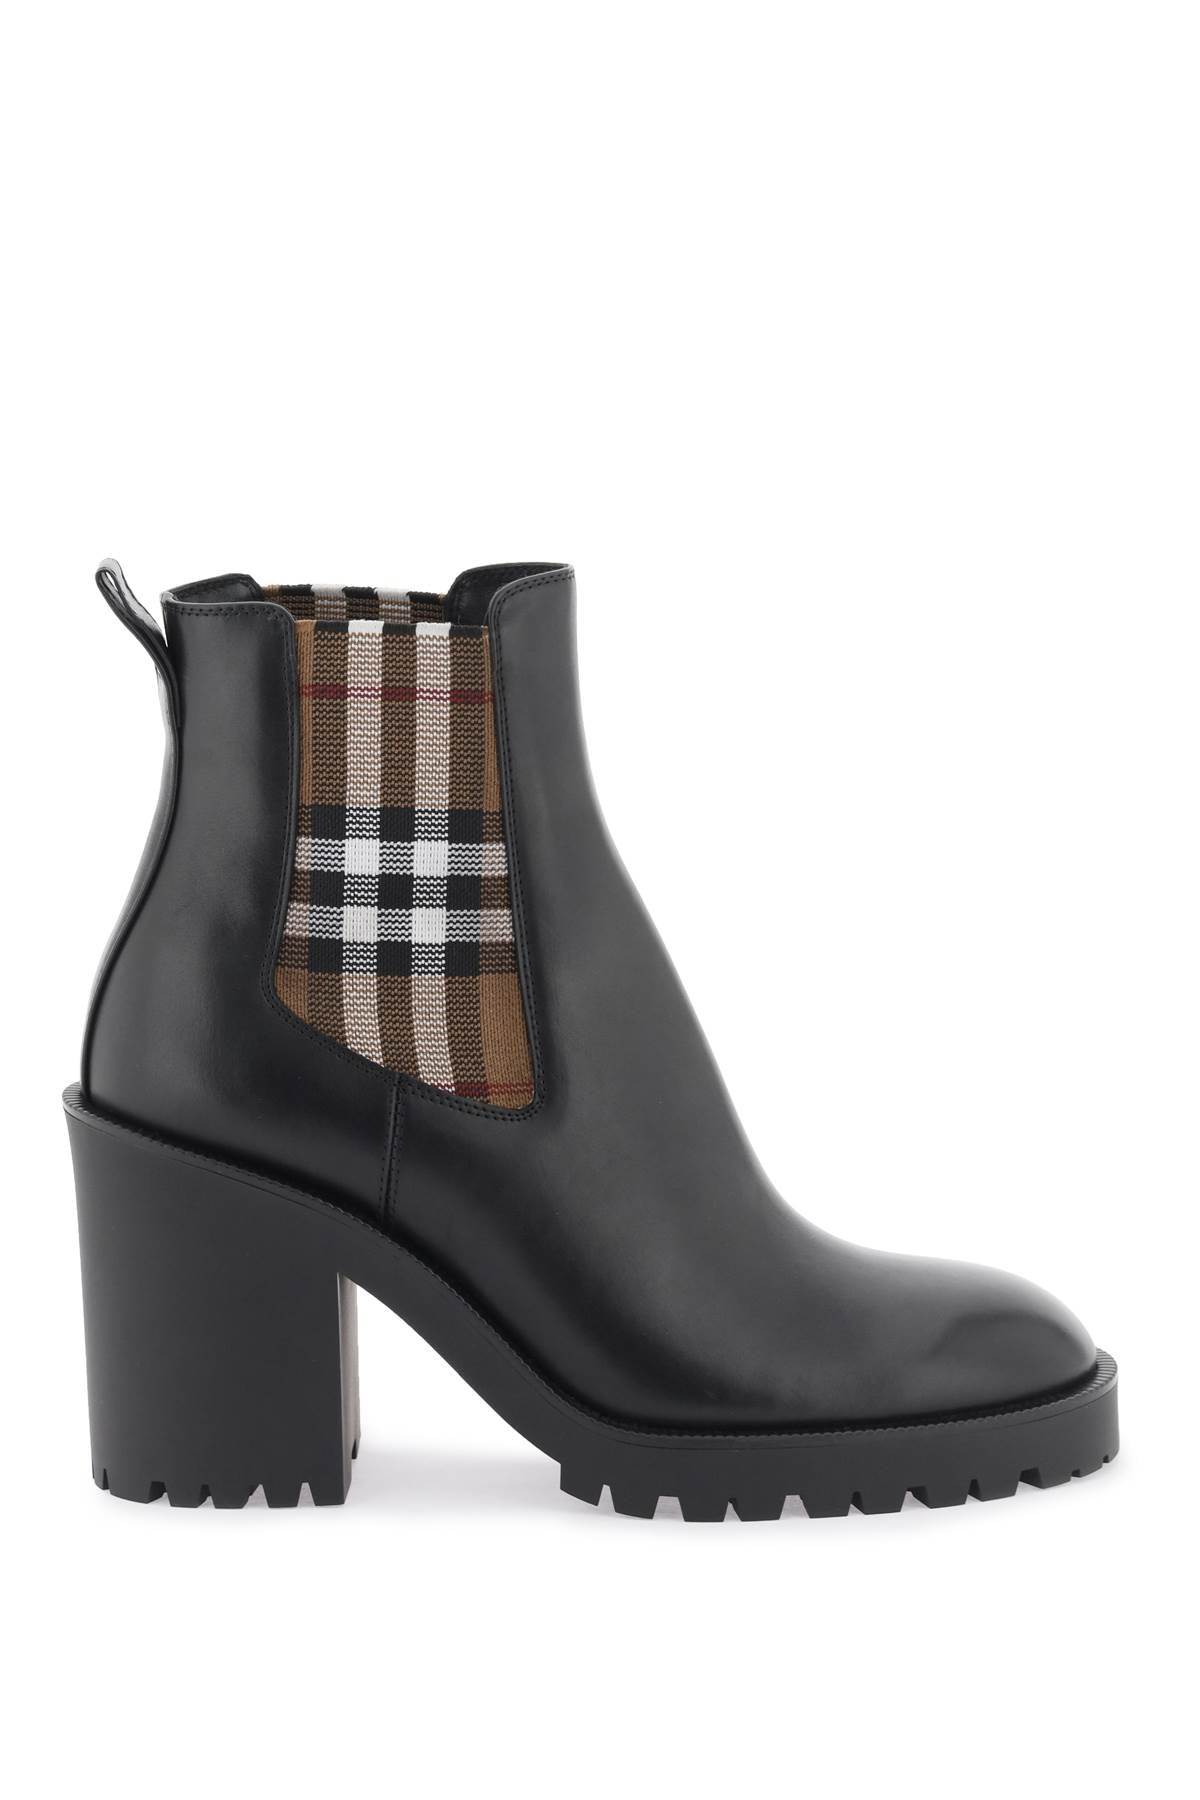 Burberry leather ankle boots with check insert